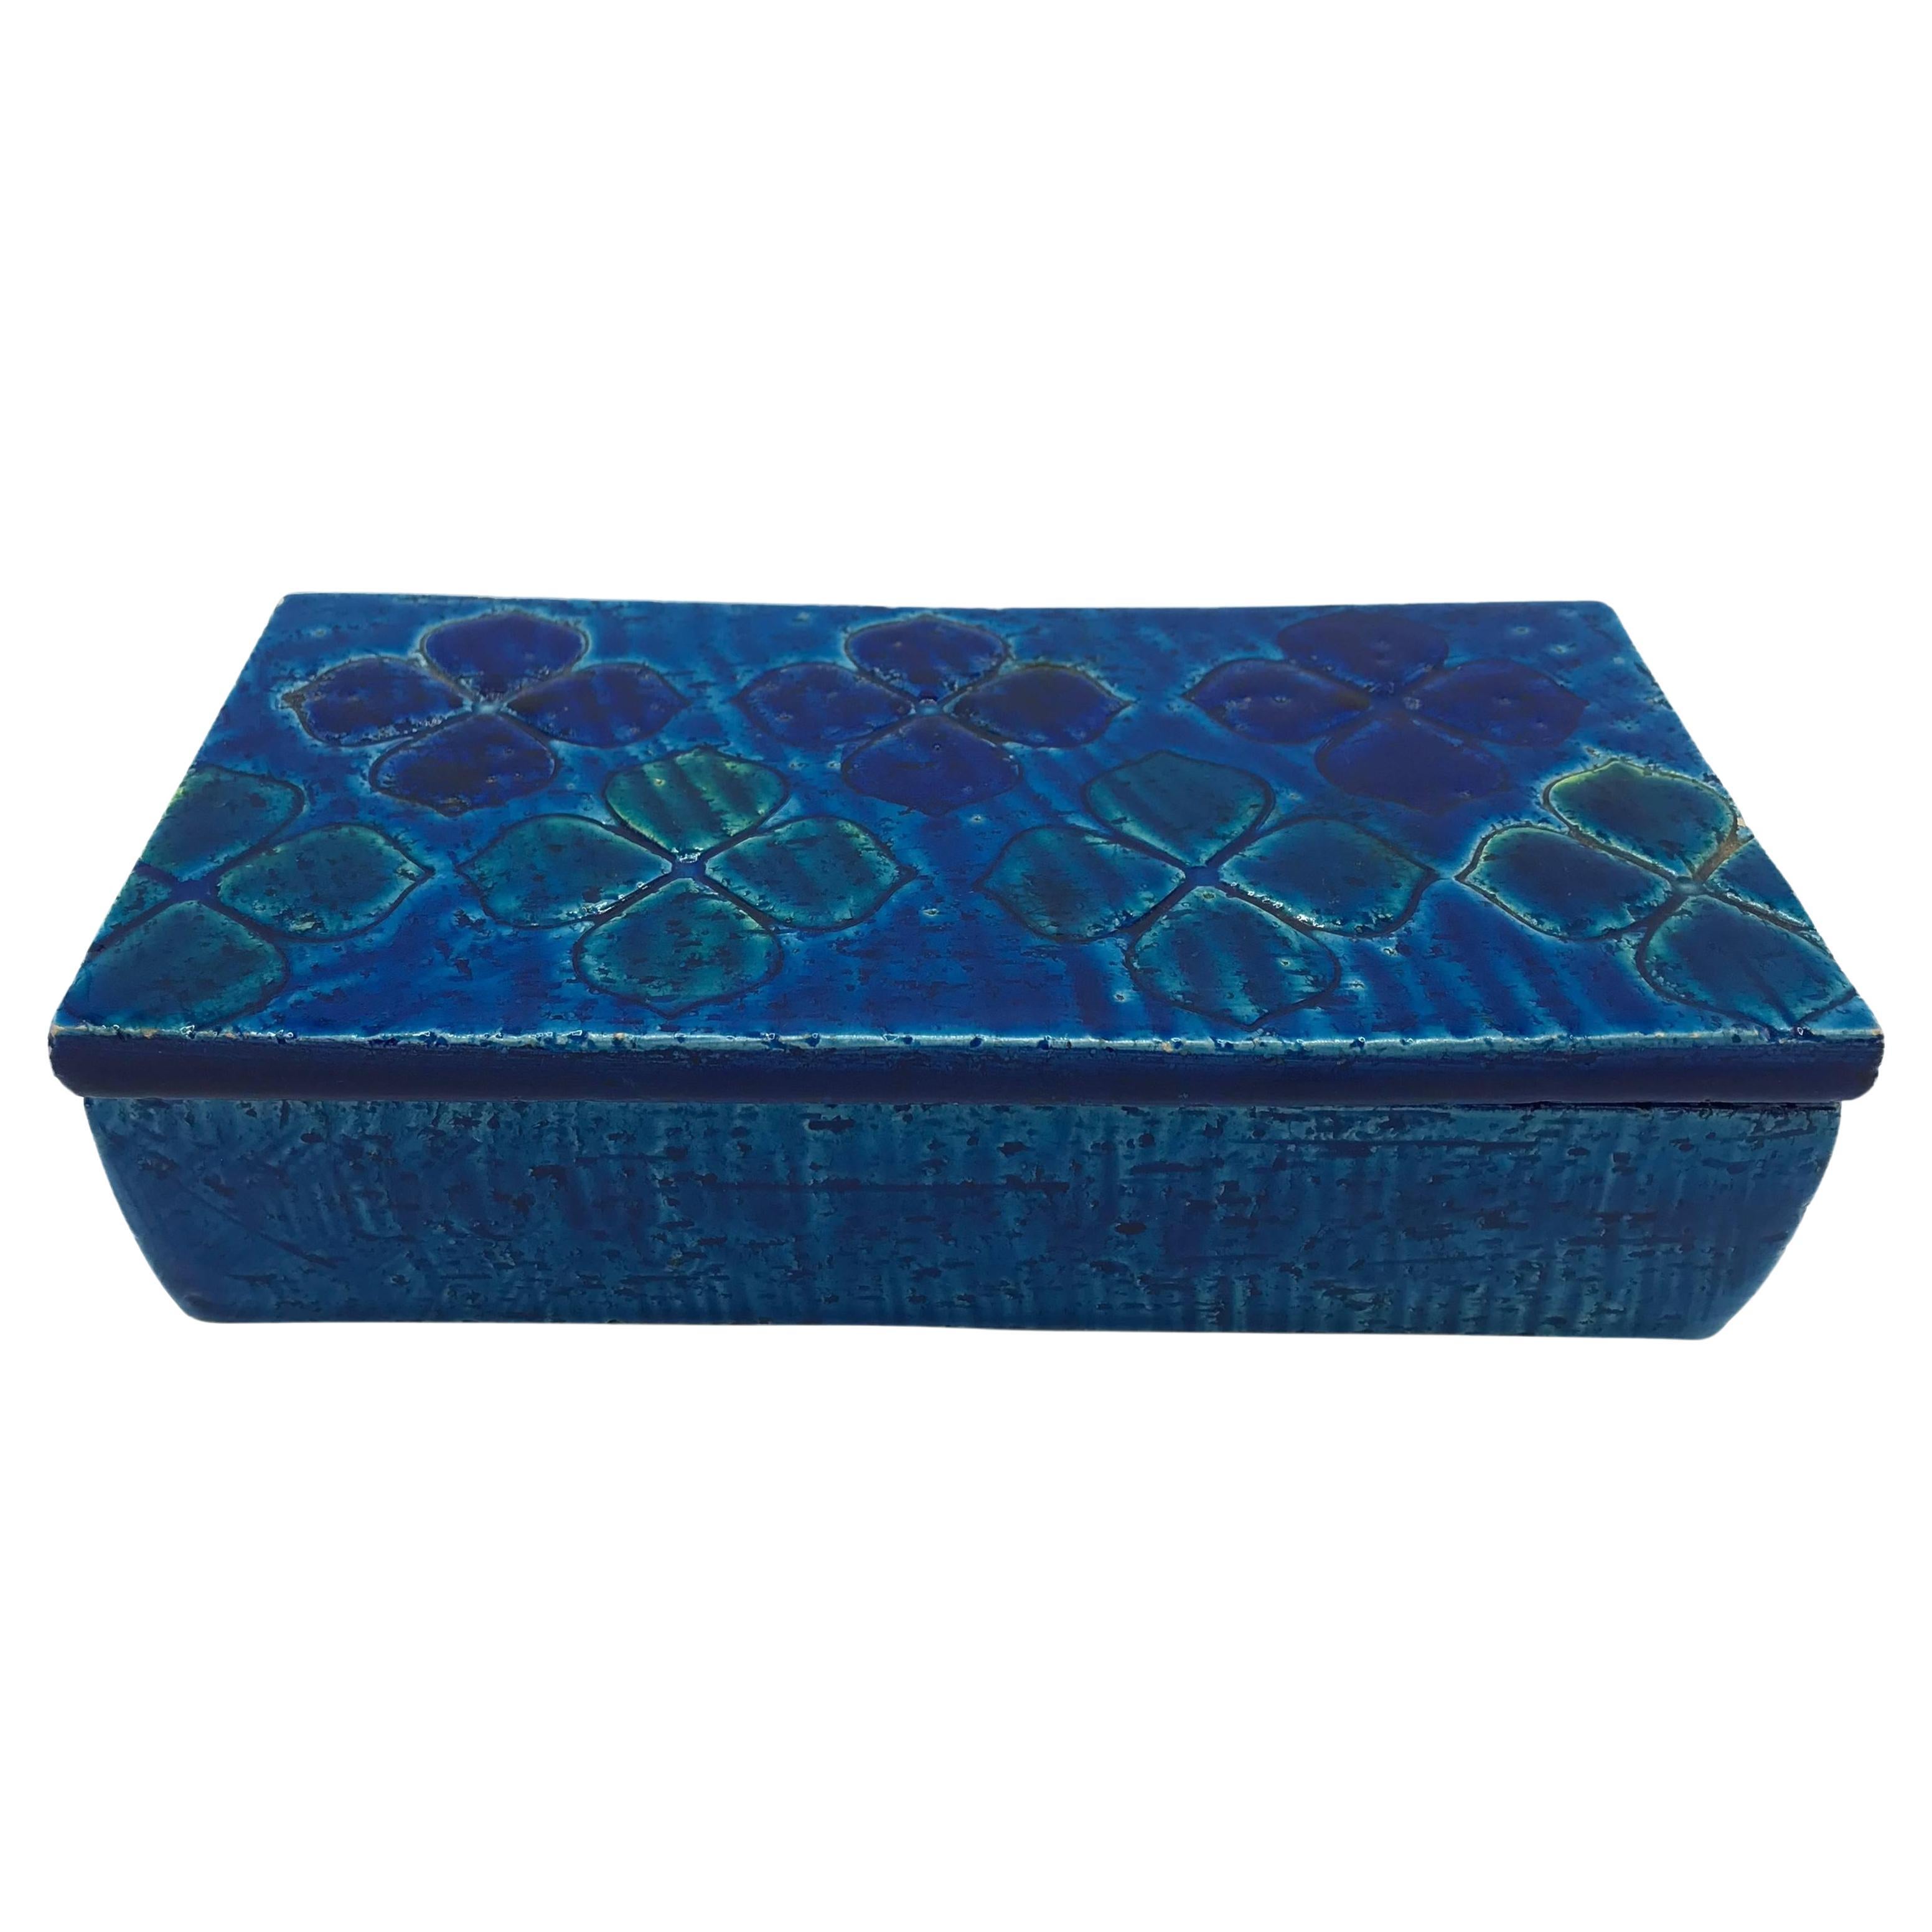 Offered is an absolutely stunning and extremely rare, 1960s Italian Aldo Londi for Bitossi 'Blue Rimini' clover lidded box. The piece has a beautiful, clover floral motif on the lid. There were only 20 of these created as Samples for the Bitossi